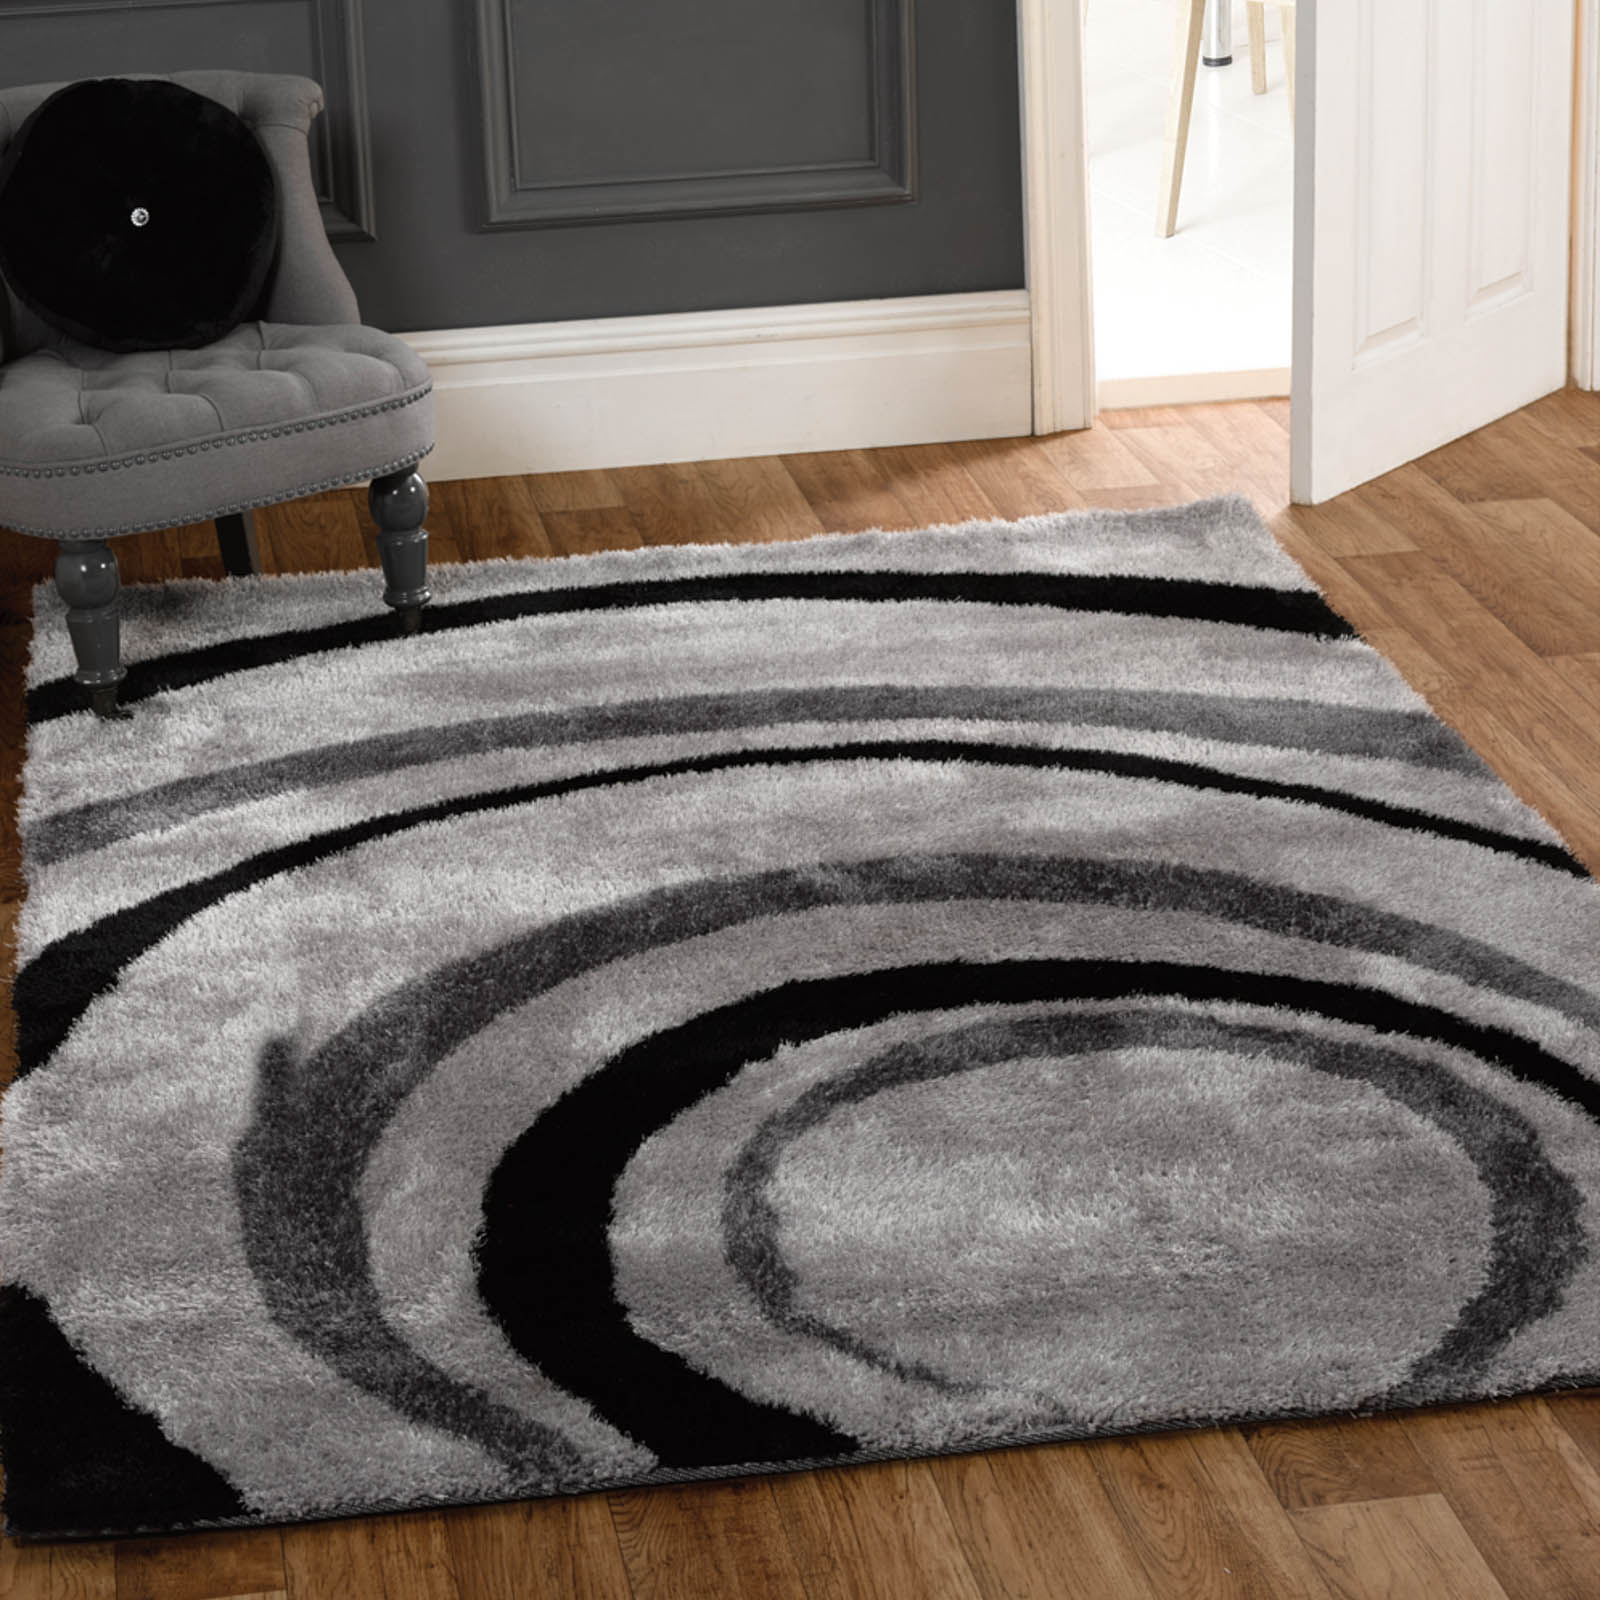 All-Rounder Grey Rugs